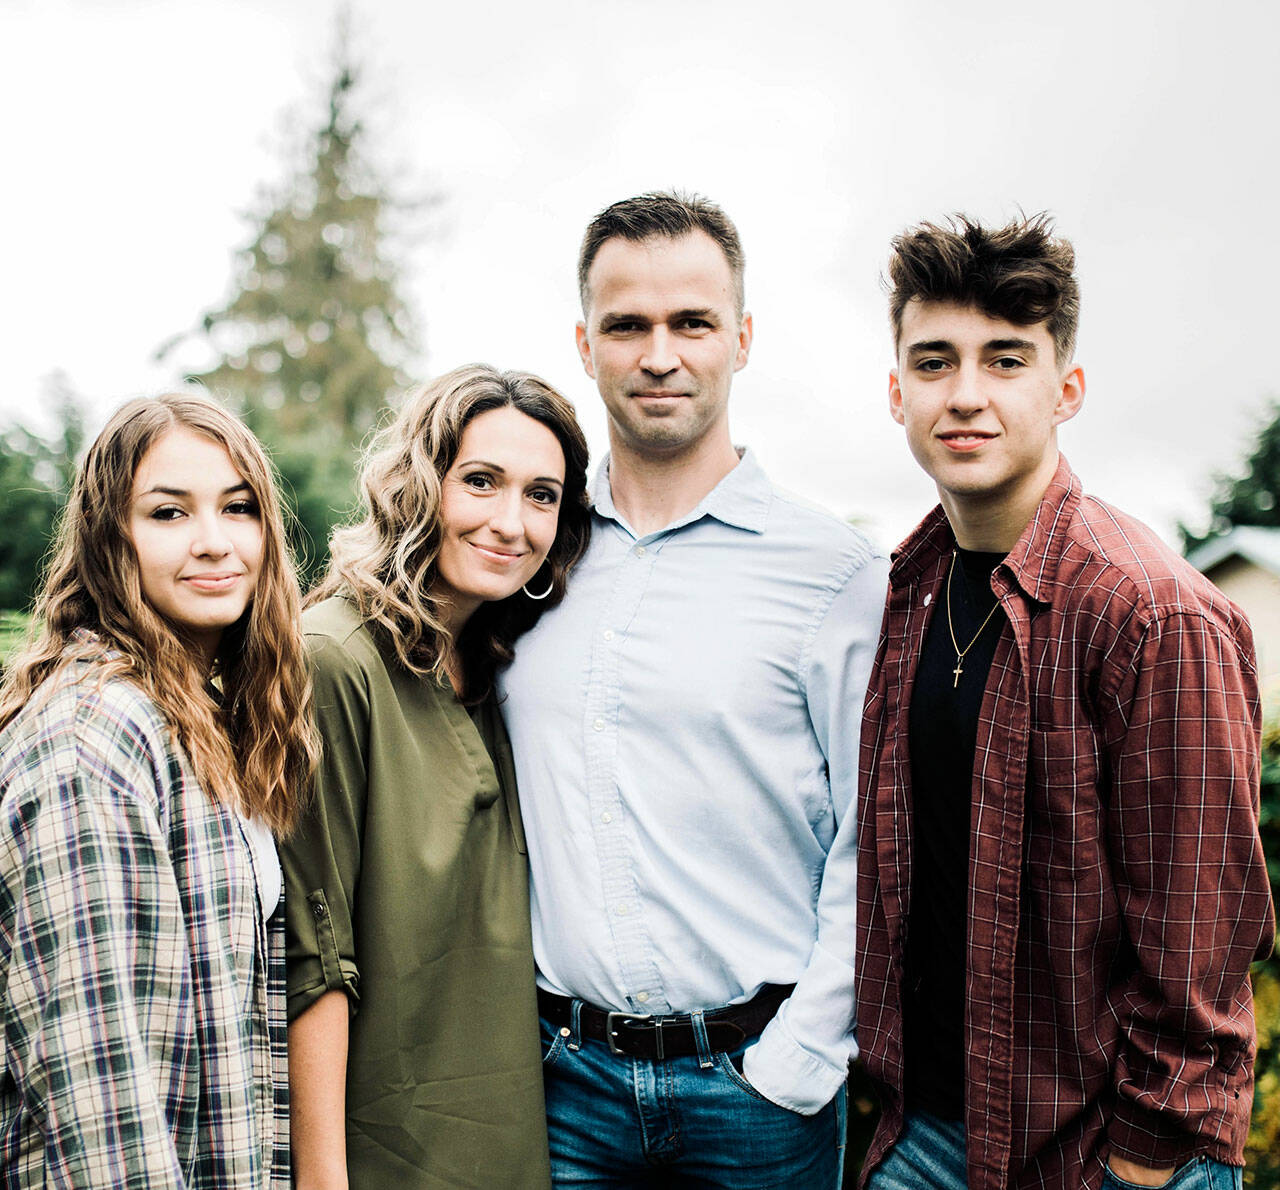 The Possin family is the new owner of the Cedarbrook Herb and Lavender Farm in Sequim. From left are Annaliece, Ashley, Aaron and Jayden.